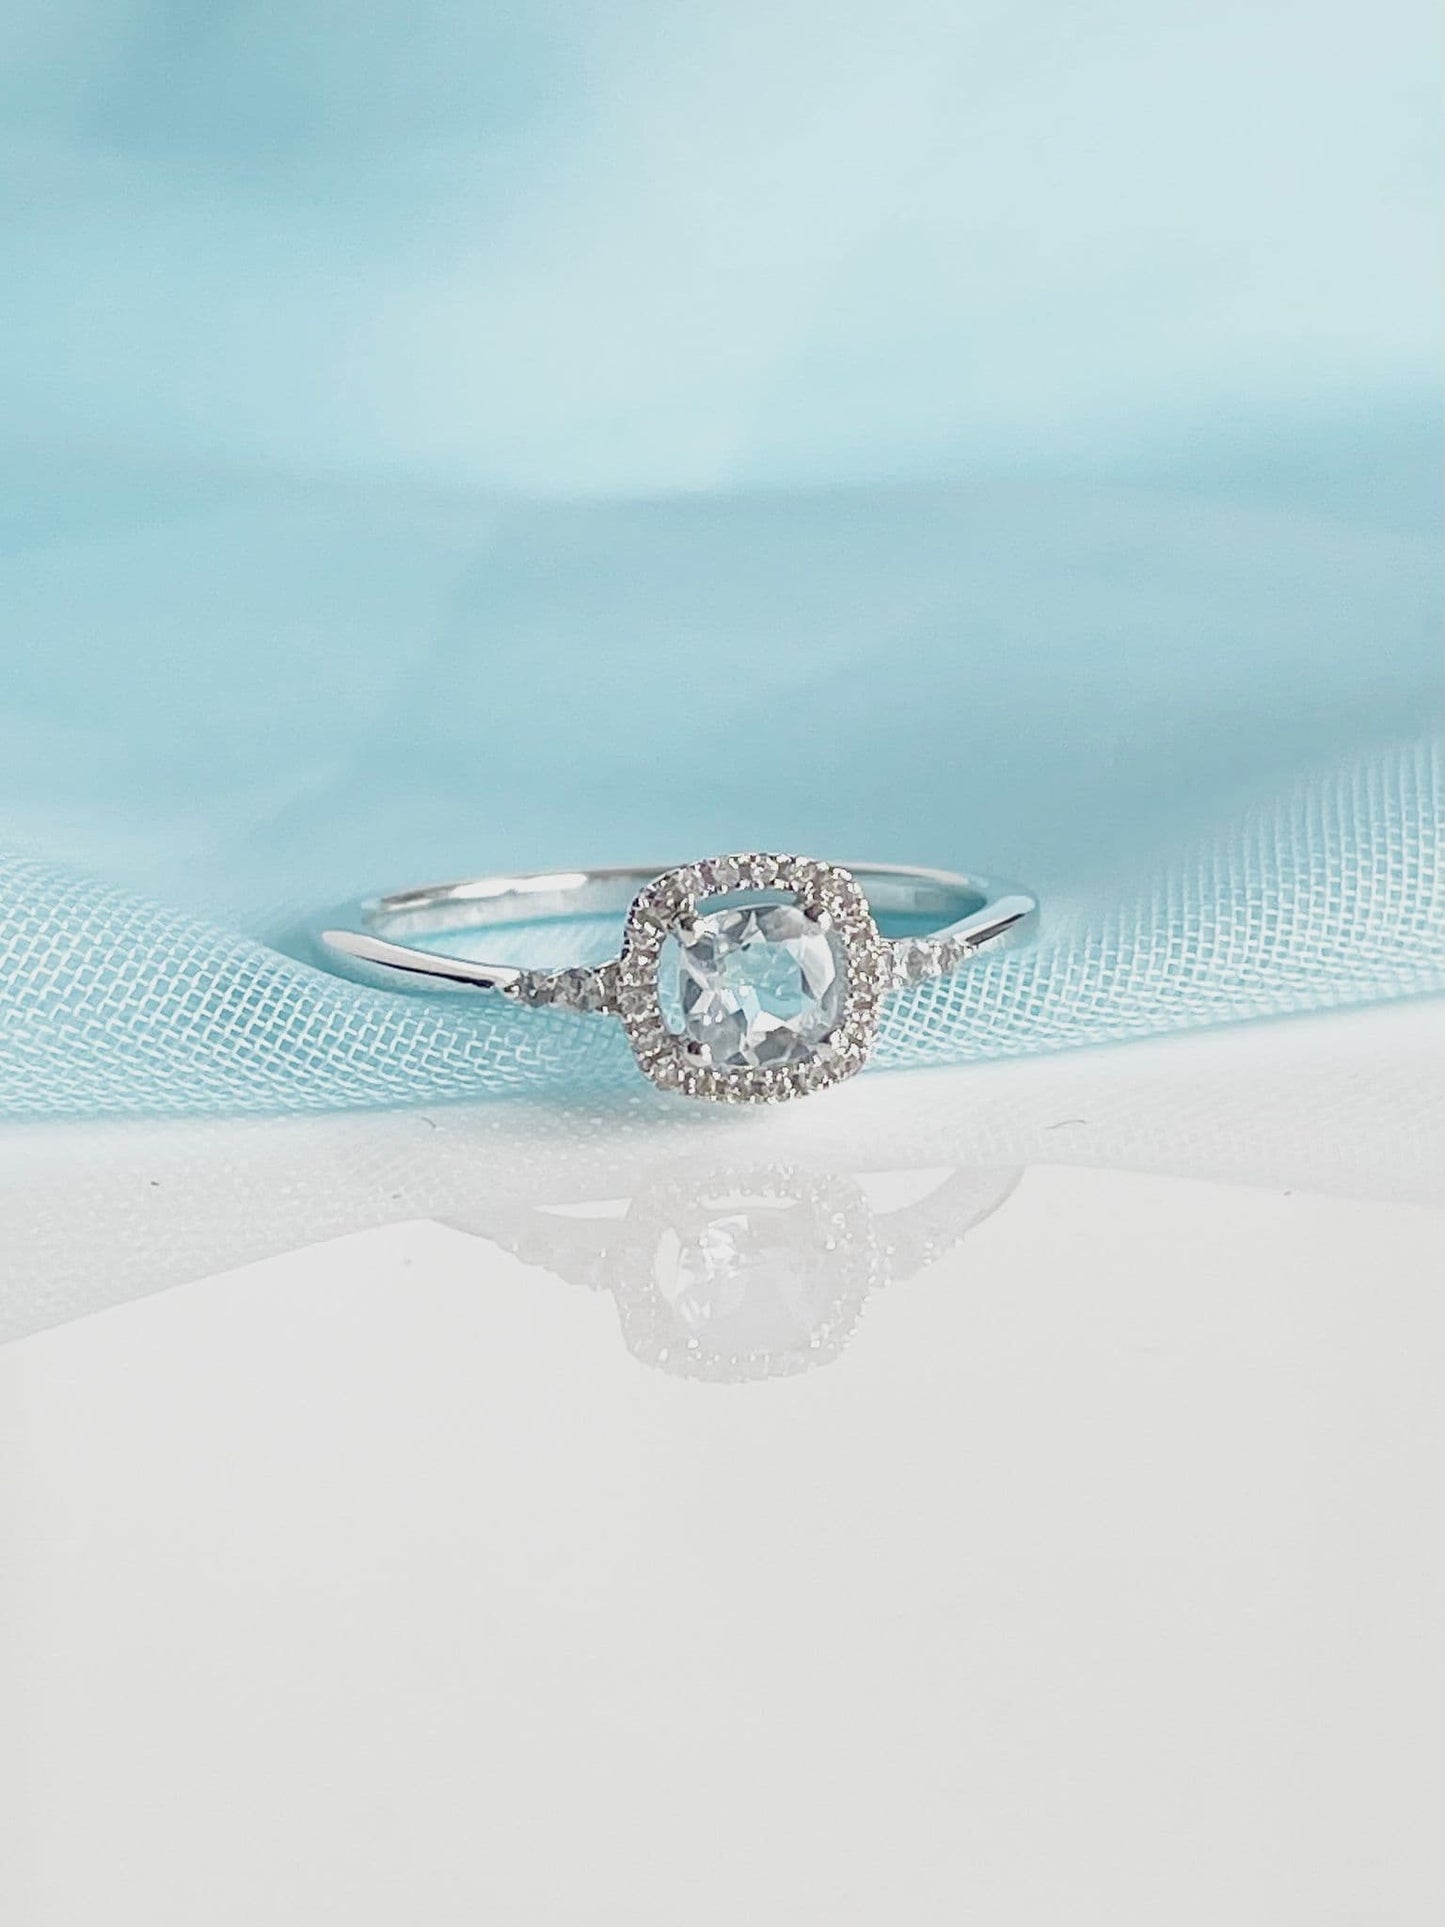 Real aquamarine ring and diamond white gold square cluster